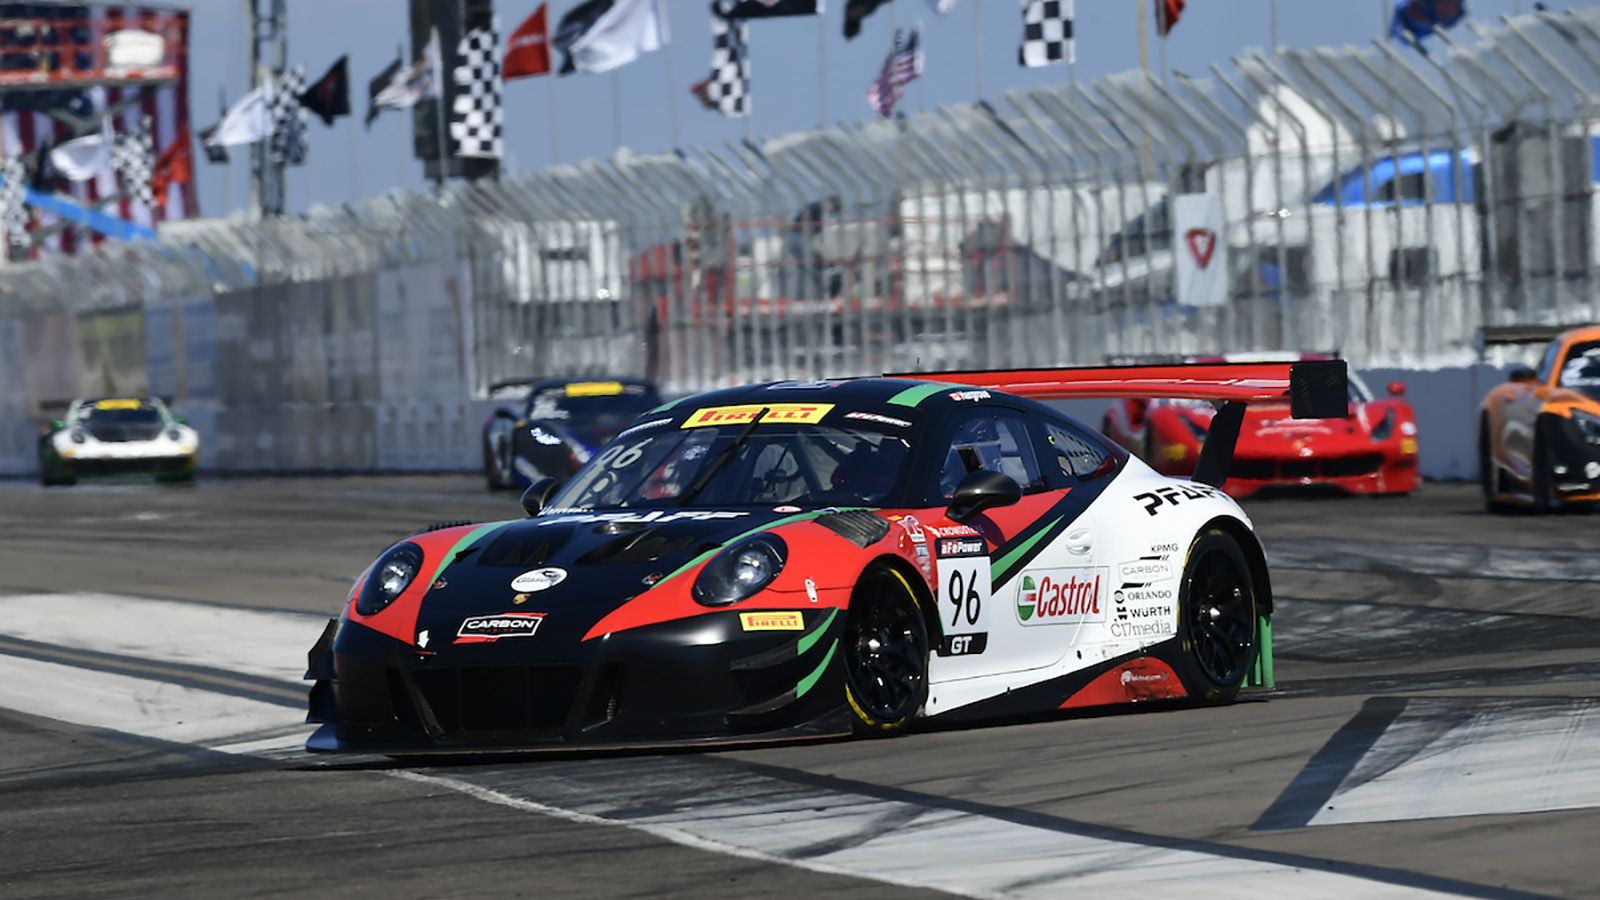 Pirelli World Challenge Partners With Project CARS 2 - Bsimracing